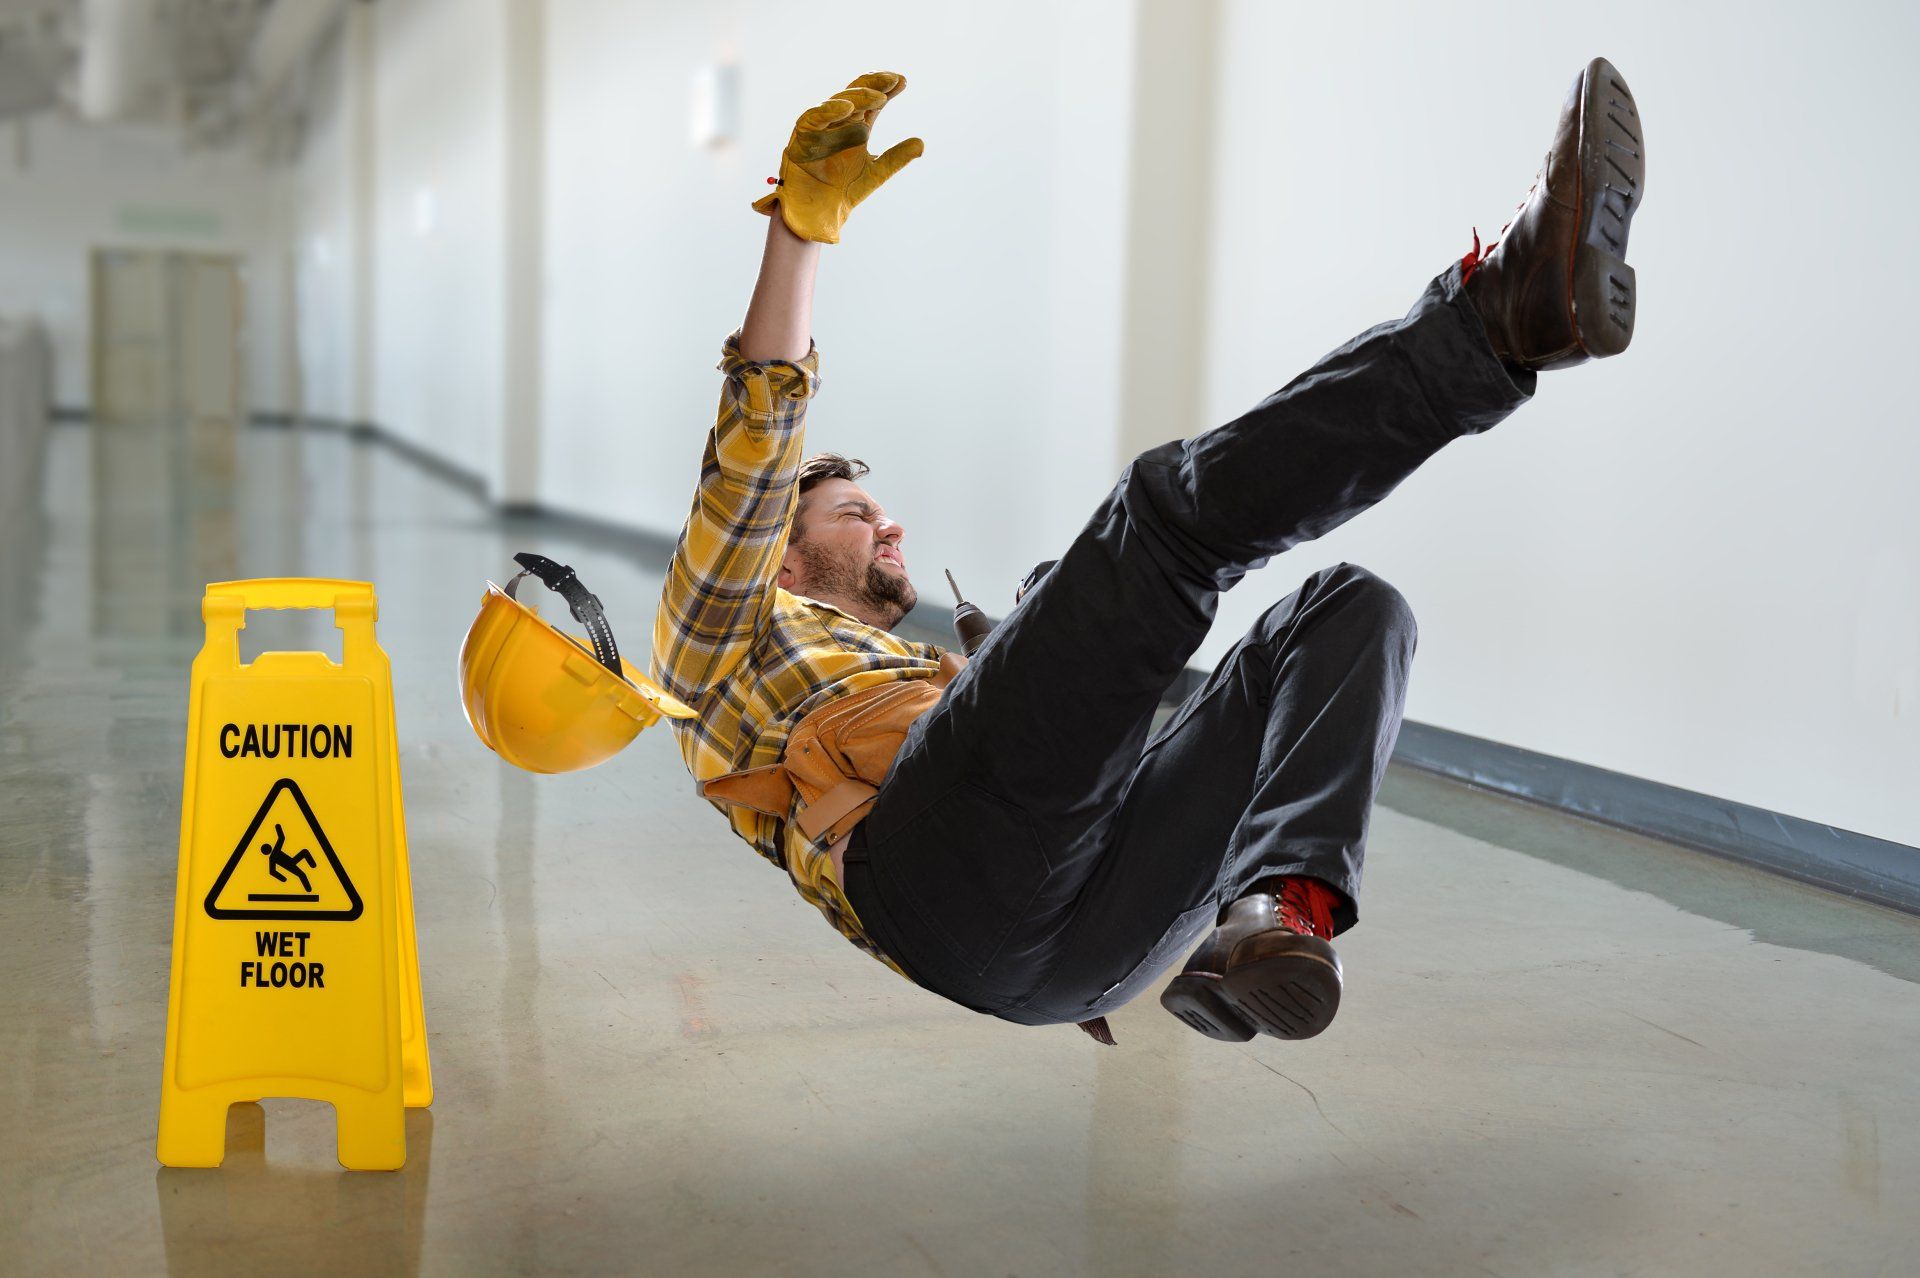 a man is falling on a wet floor next to a caution sign .